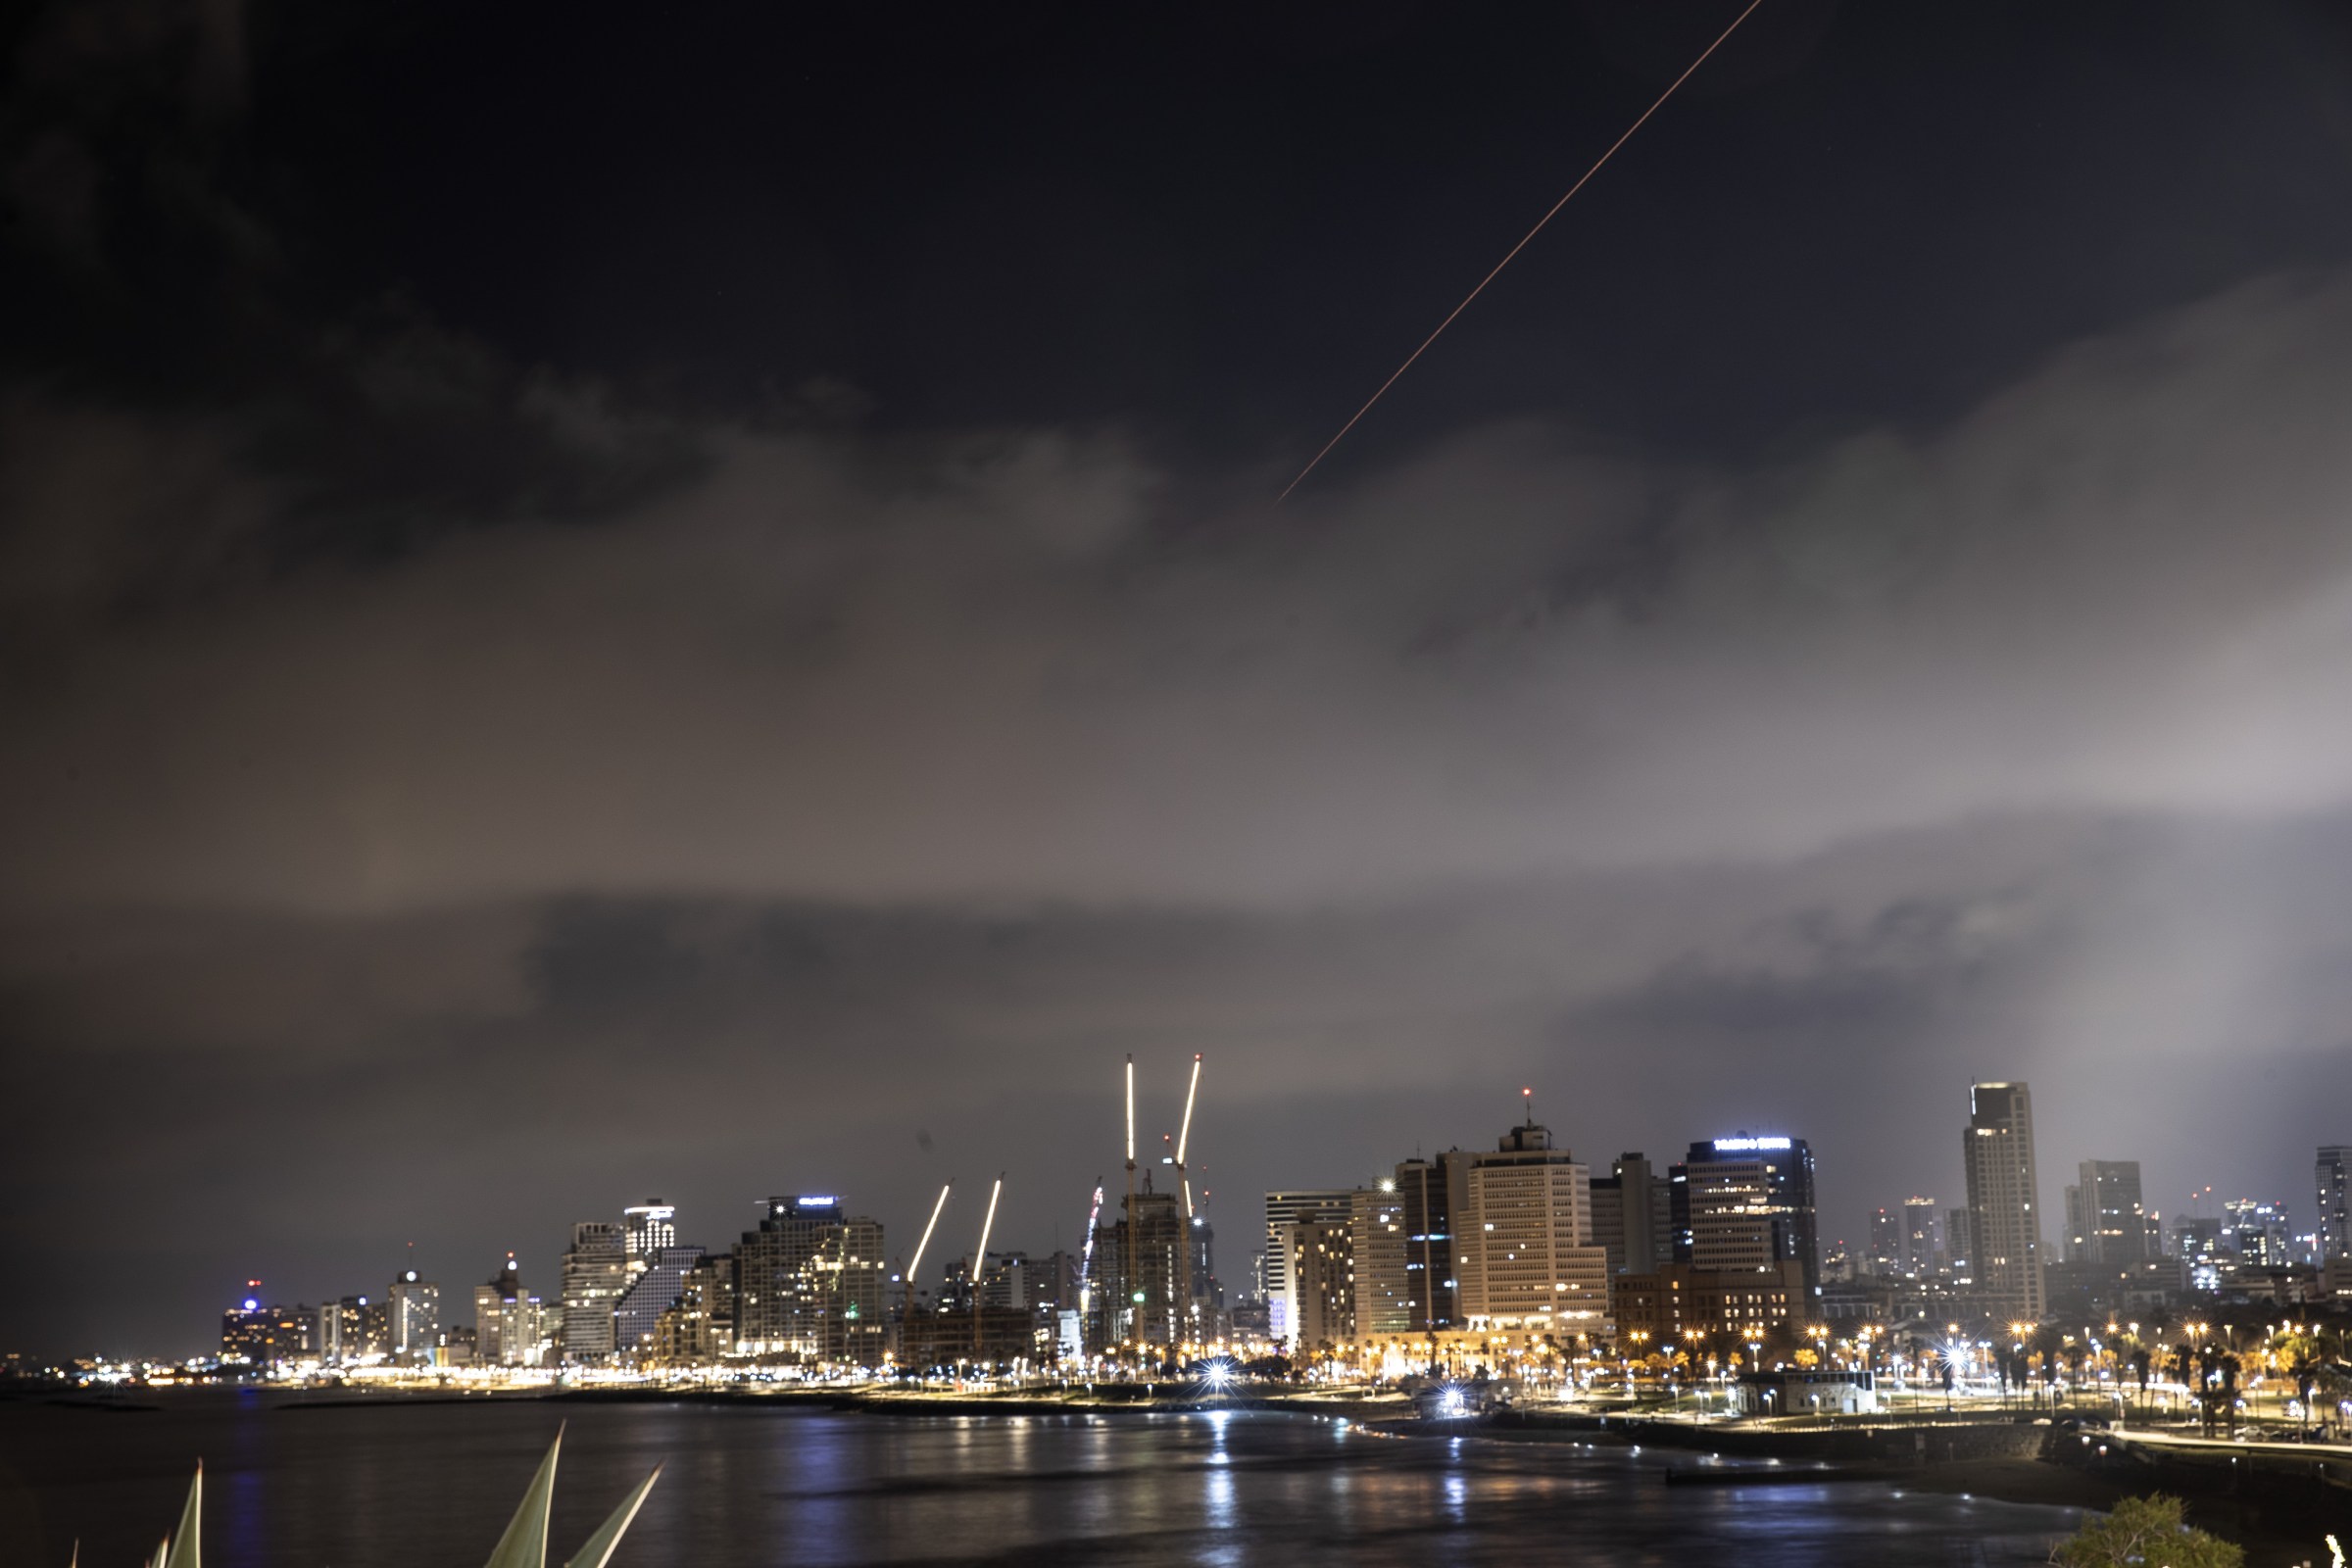 Explosions are seen in the skies of Israel’s capital, following the retaliatory attack from Iran over the weekend.